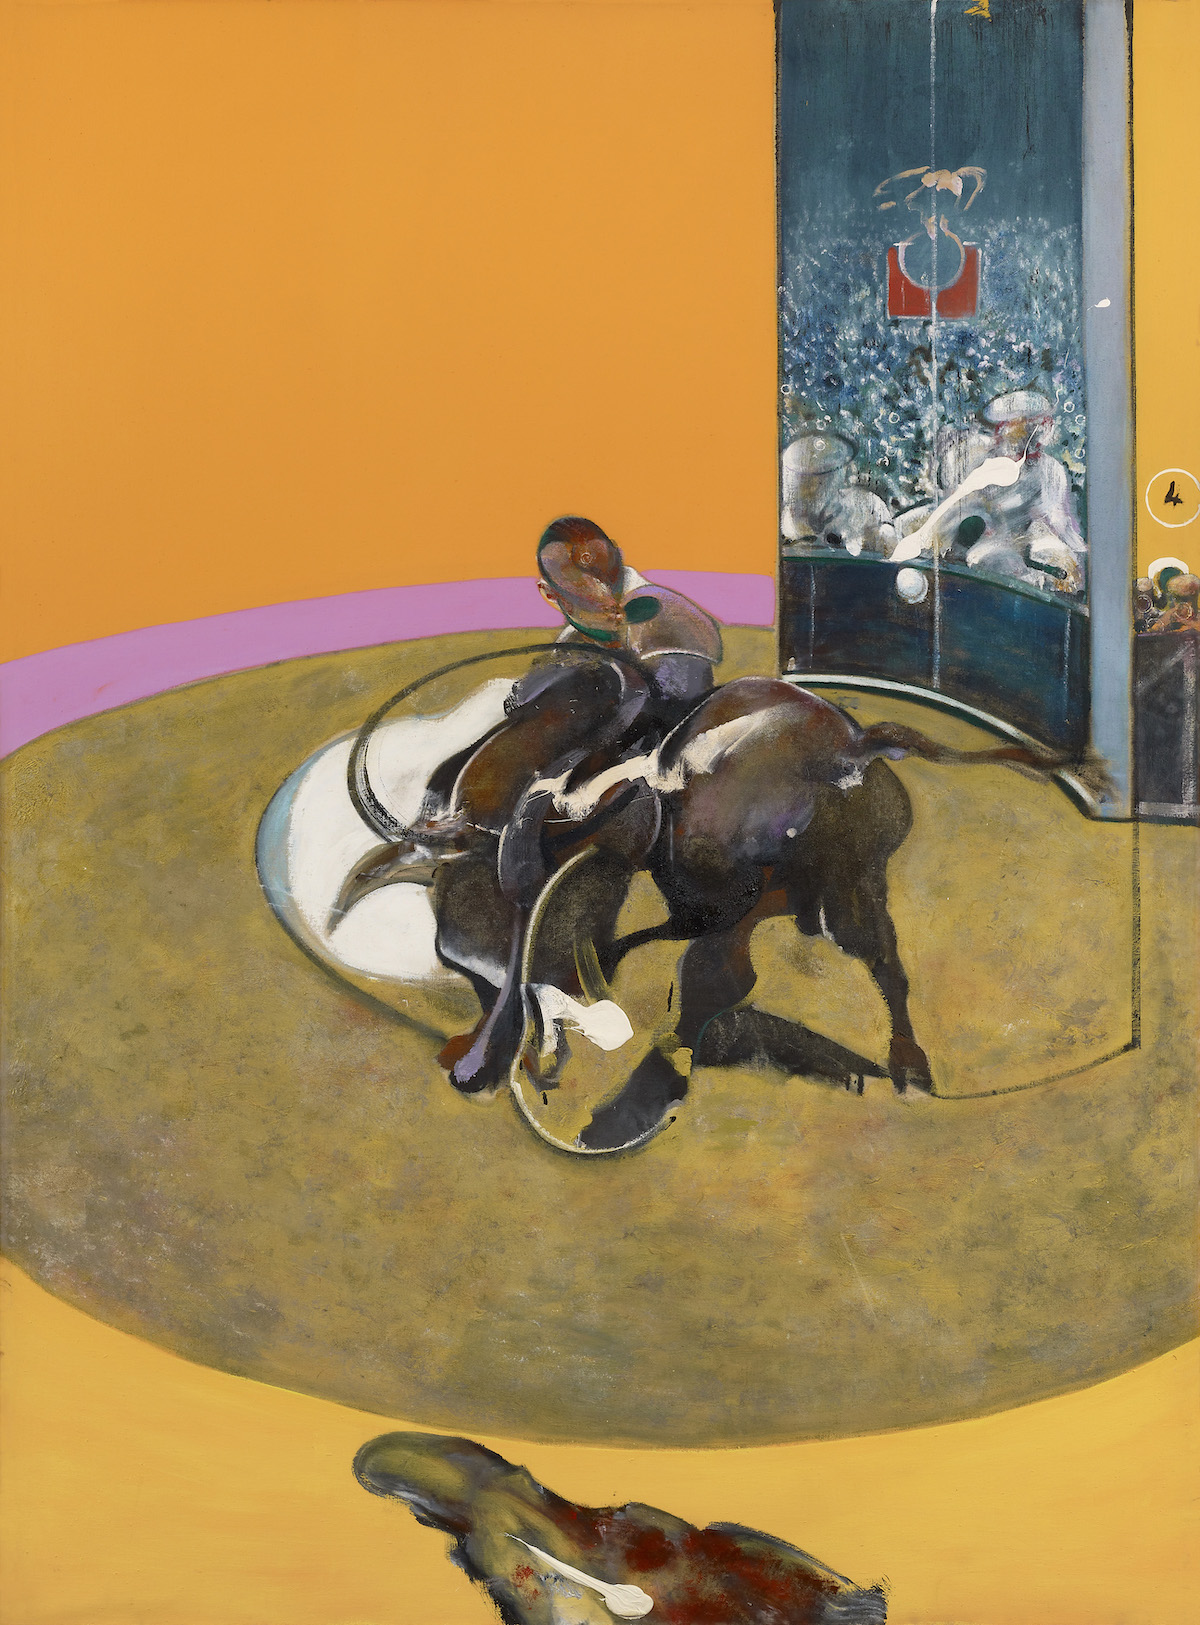 The Wick - Francis Bacon, Study for Bullfight No. 1, 1969
Oil on canvas, 198 x 147.5cm 
Private collection
© The Estate of Francis Bacon. All rights reserved, DACS/Artimage 2021. Photo: Prudence Cuming Associates Ltd